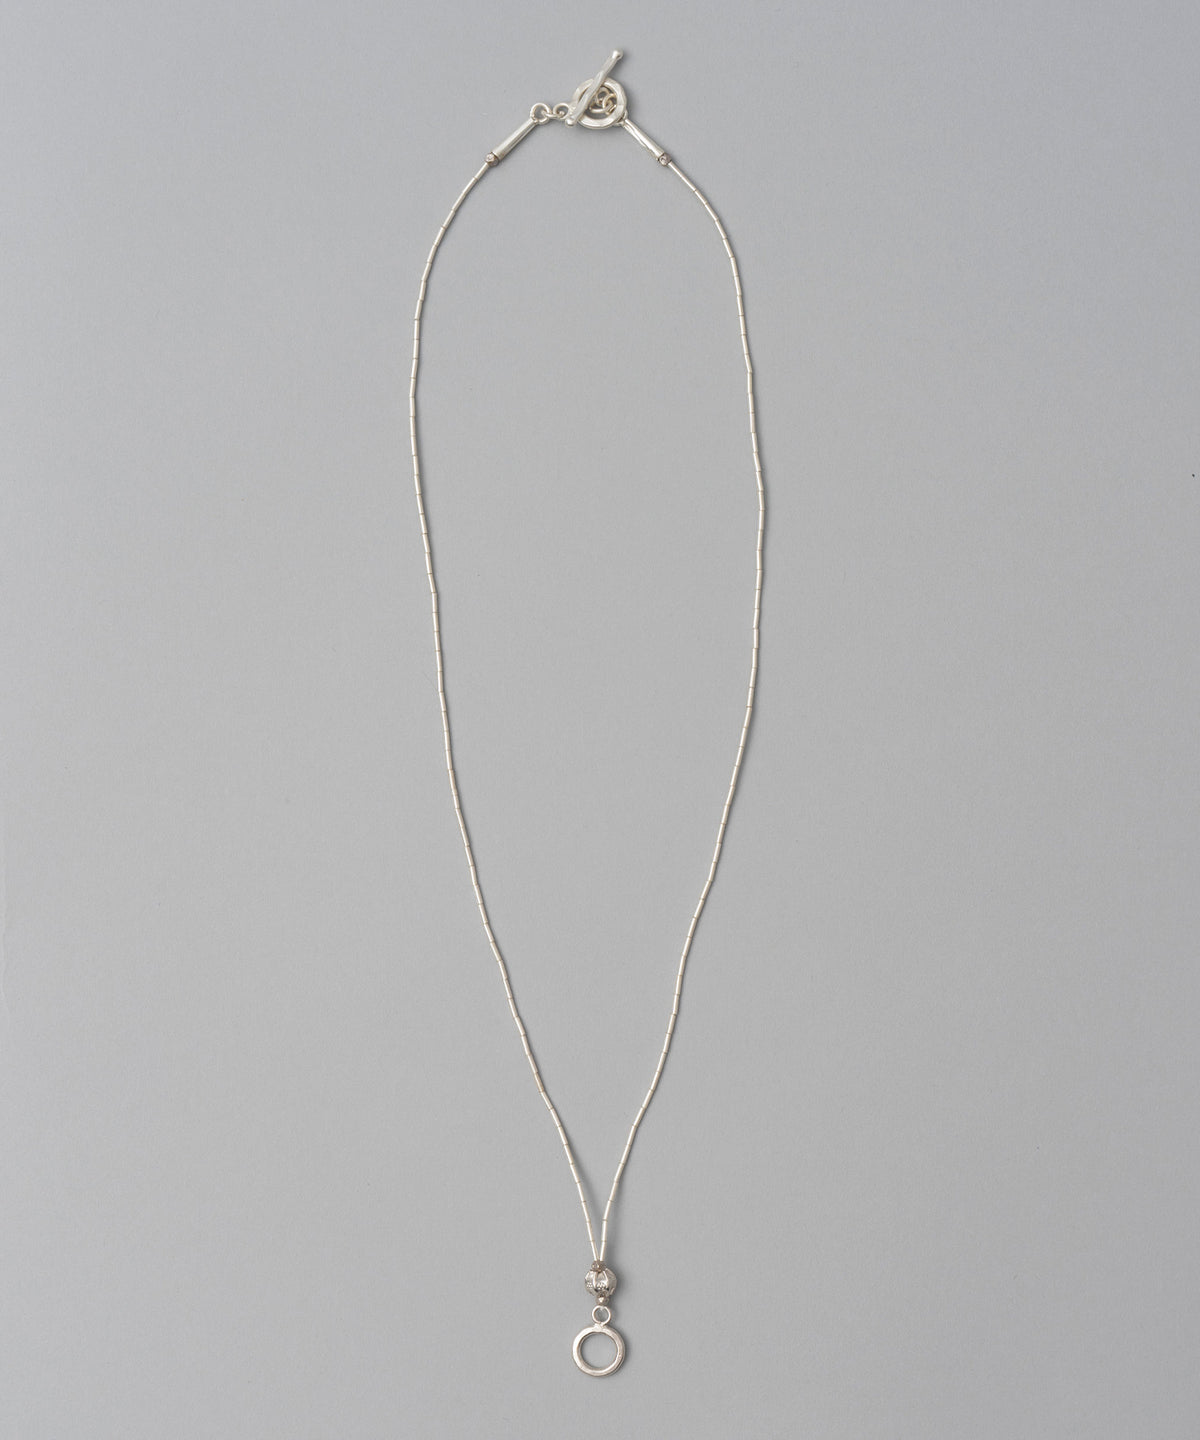 【Mountain People x MAISON SPECIAL】Necklace2